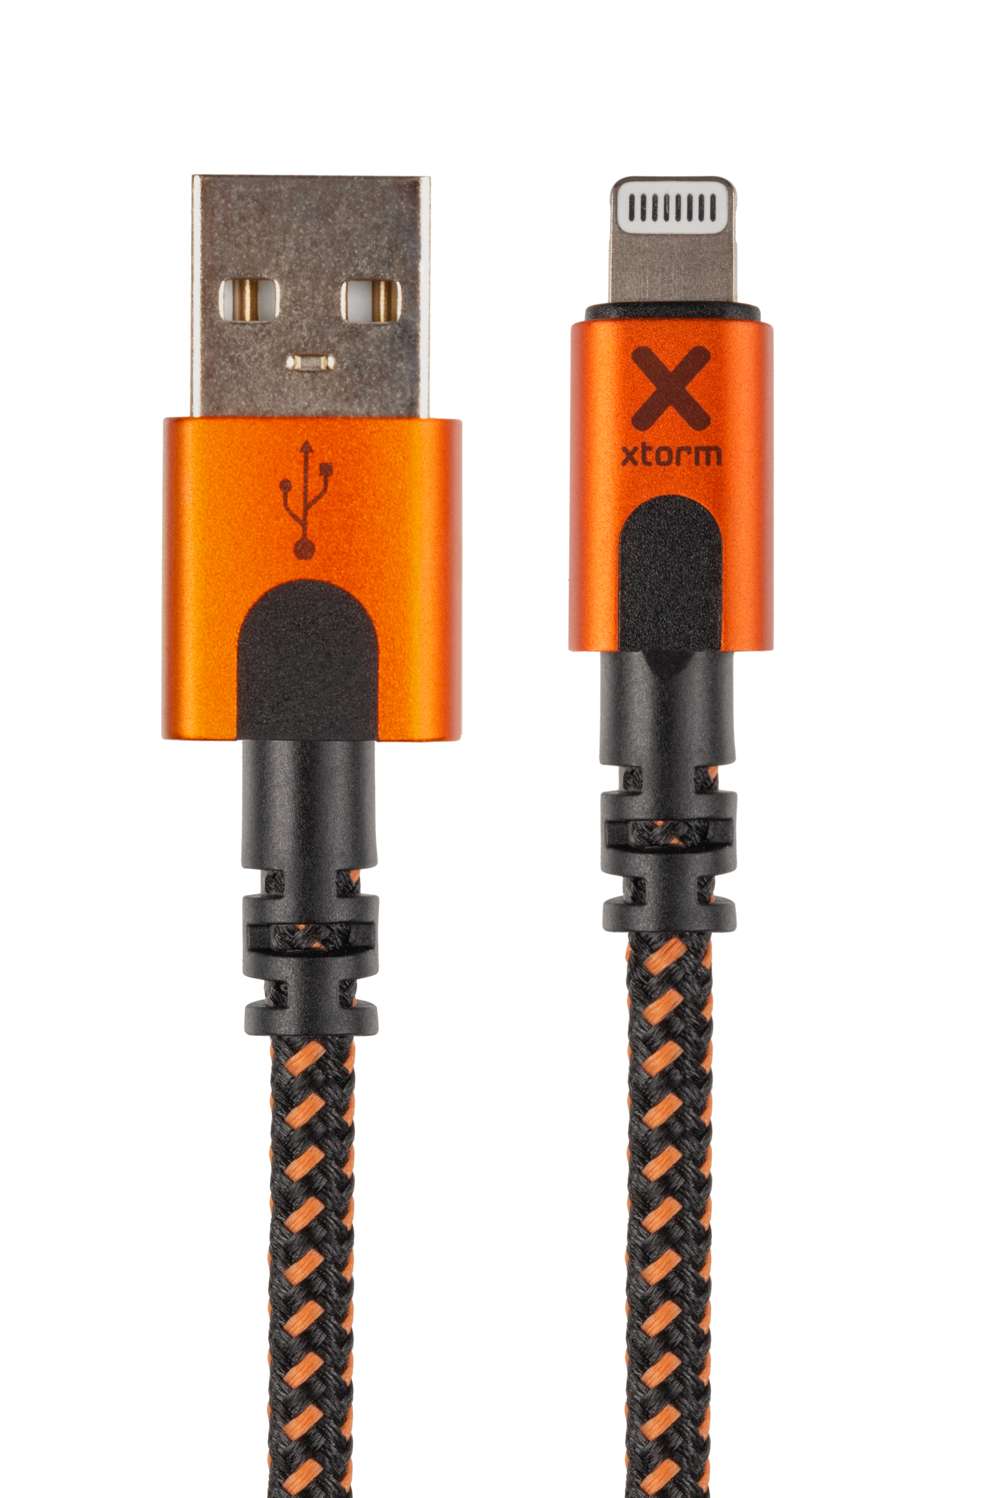 Xtreme USB to Lightning Cable - 1.5 meter